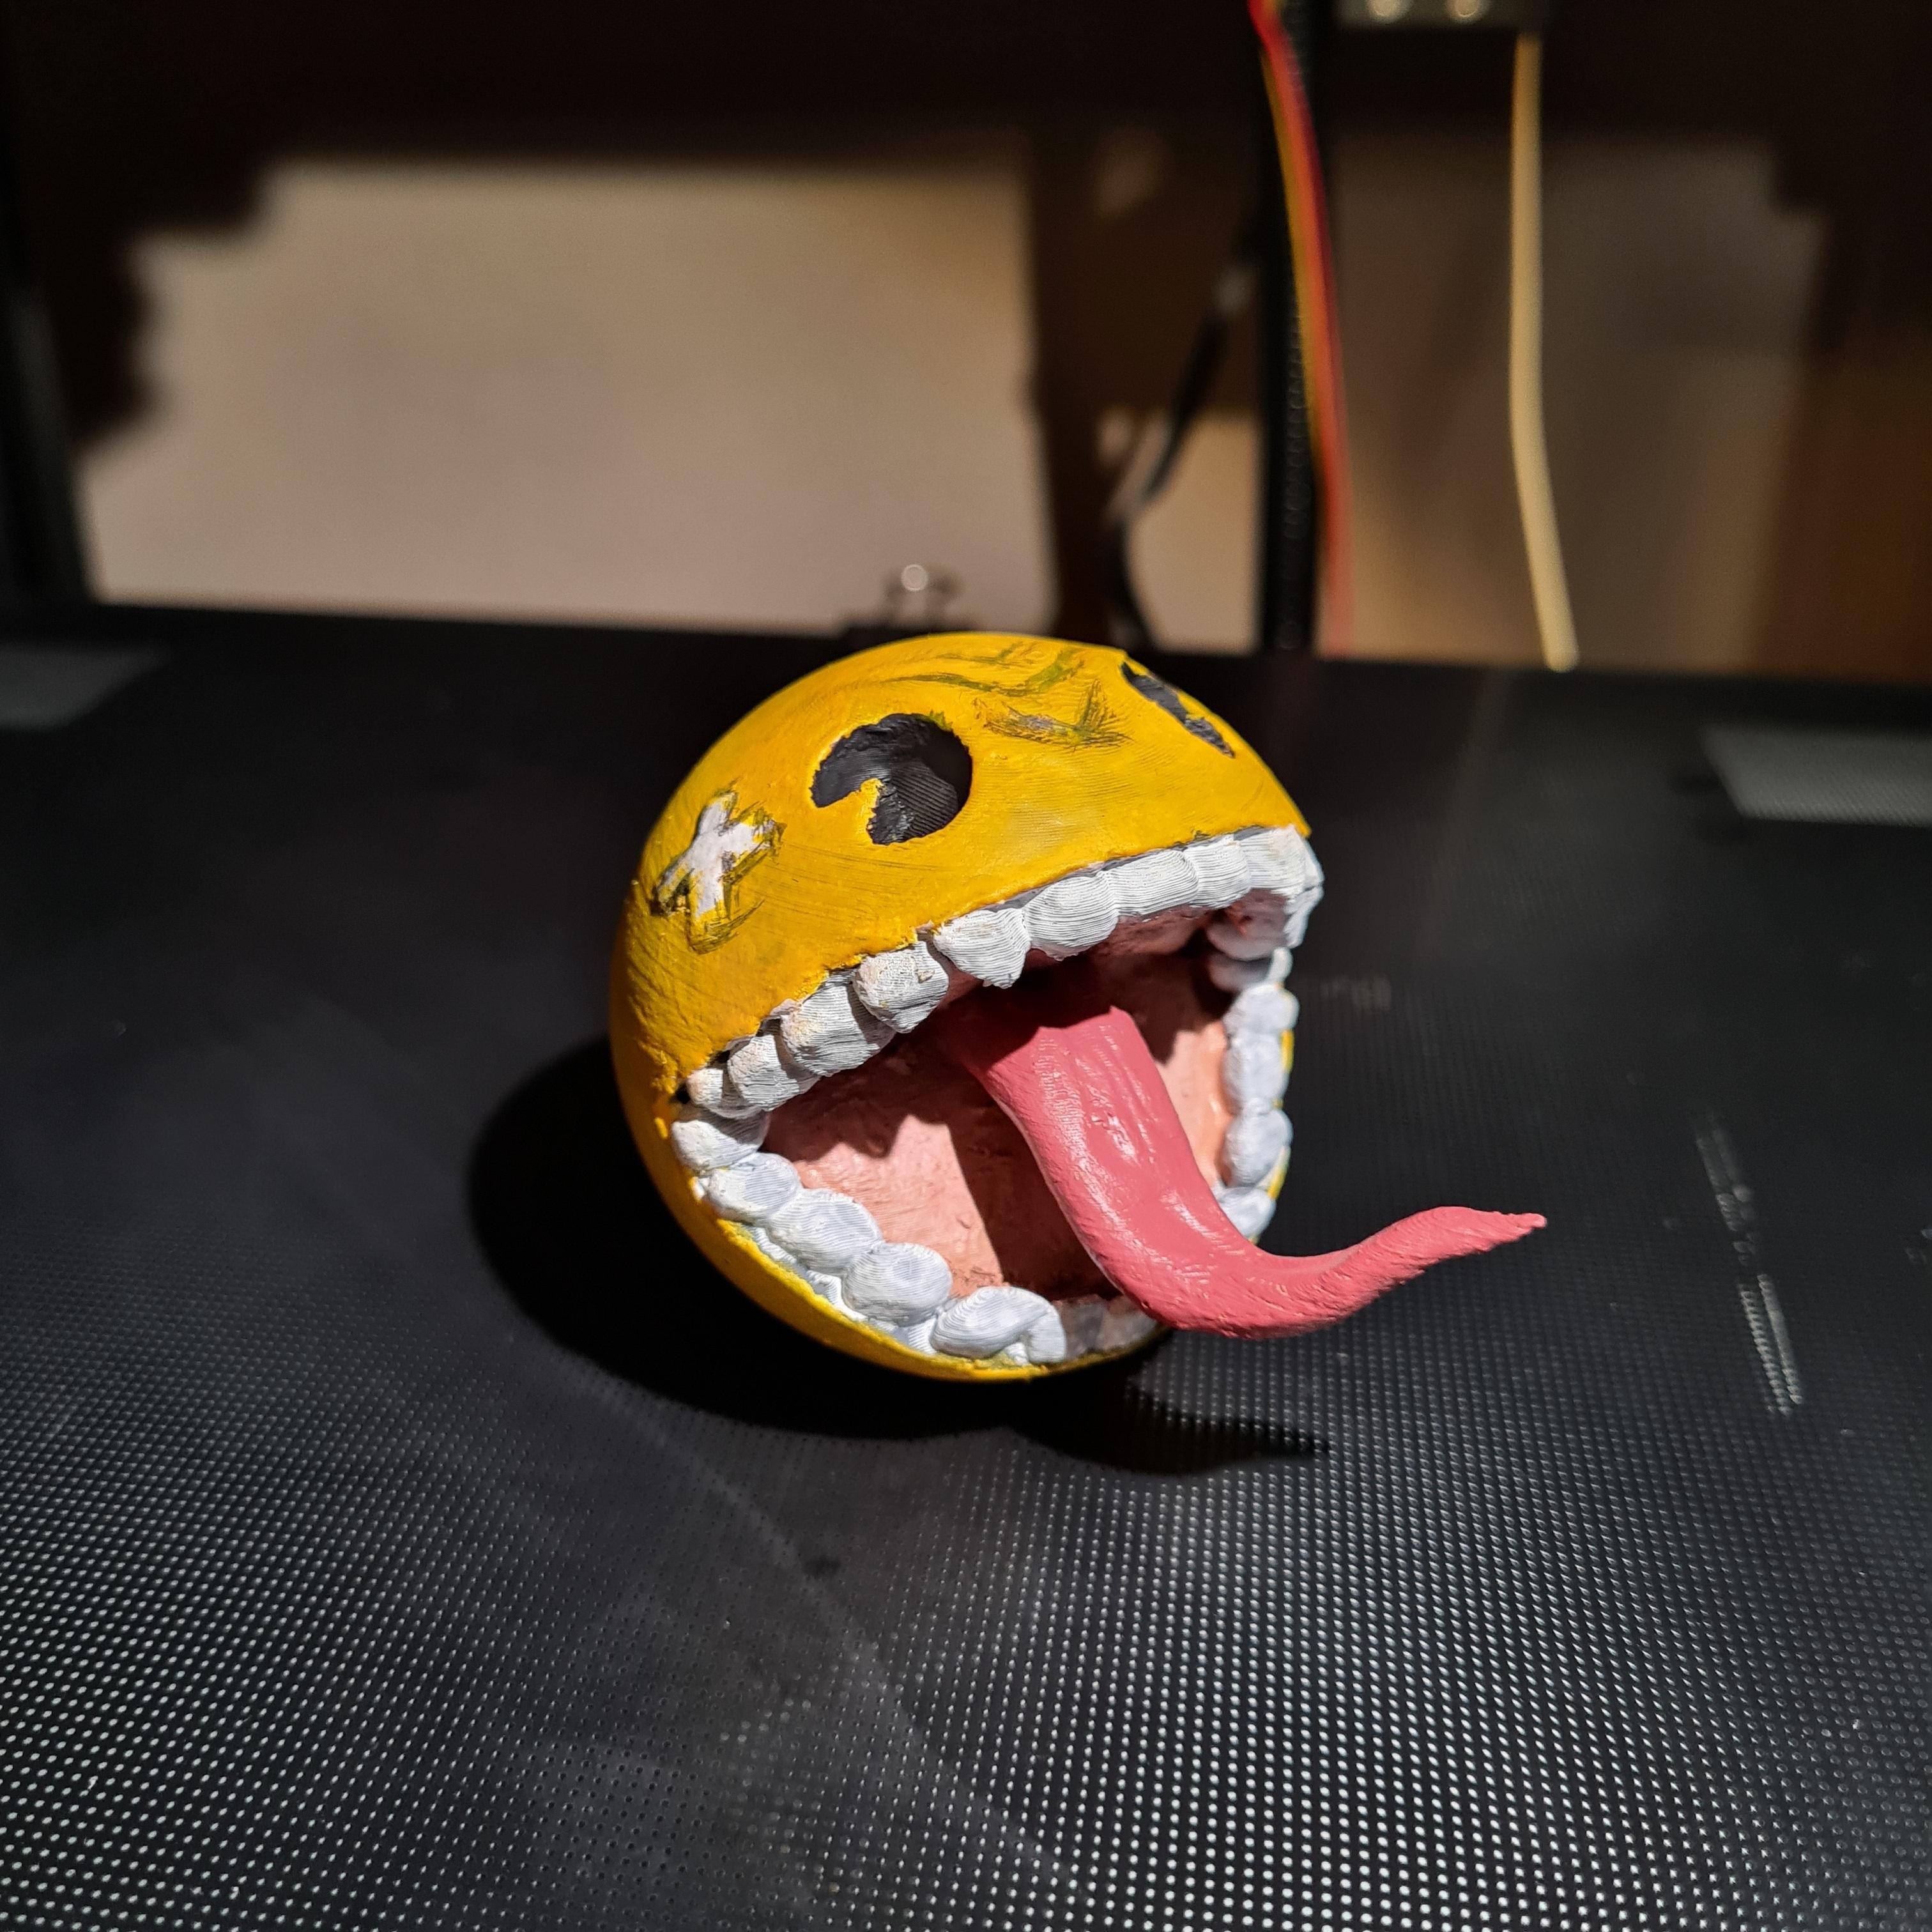 Angry pacman 3d model